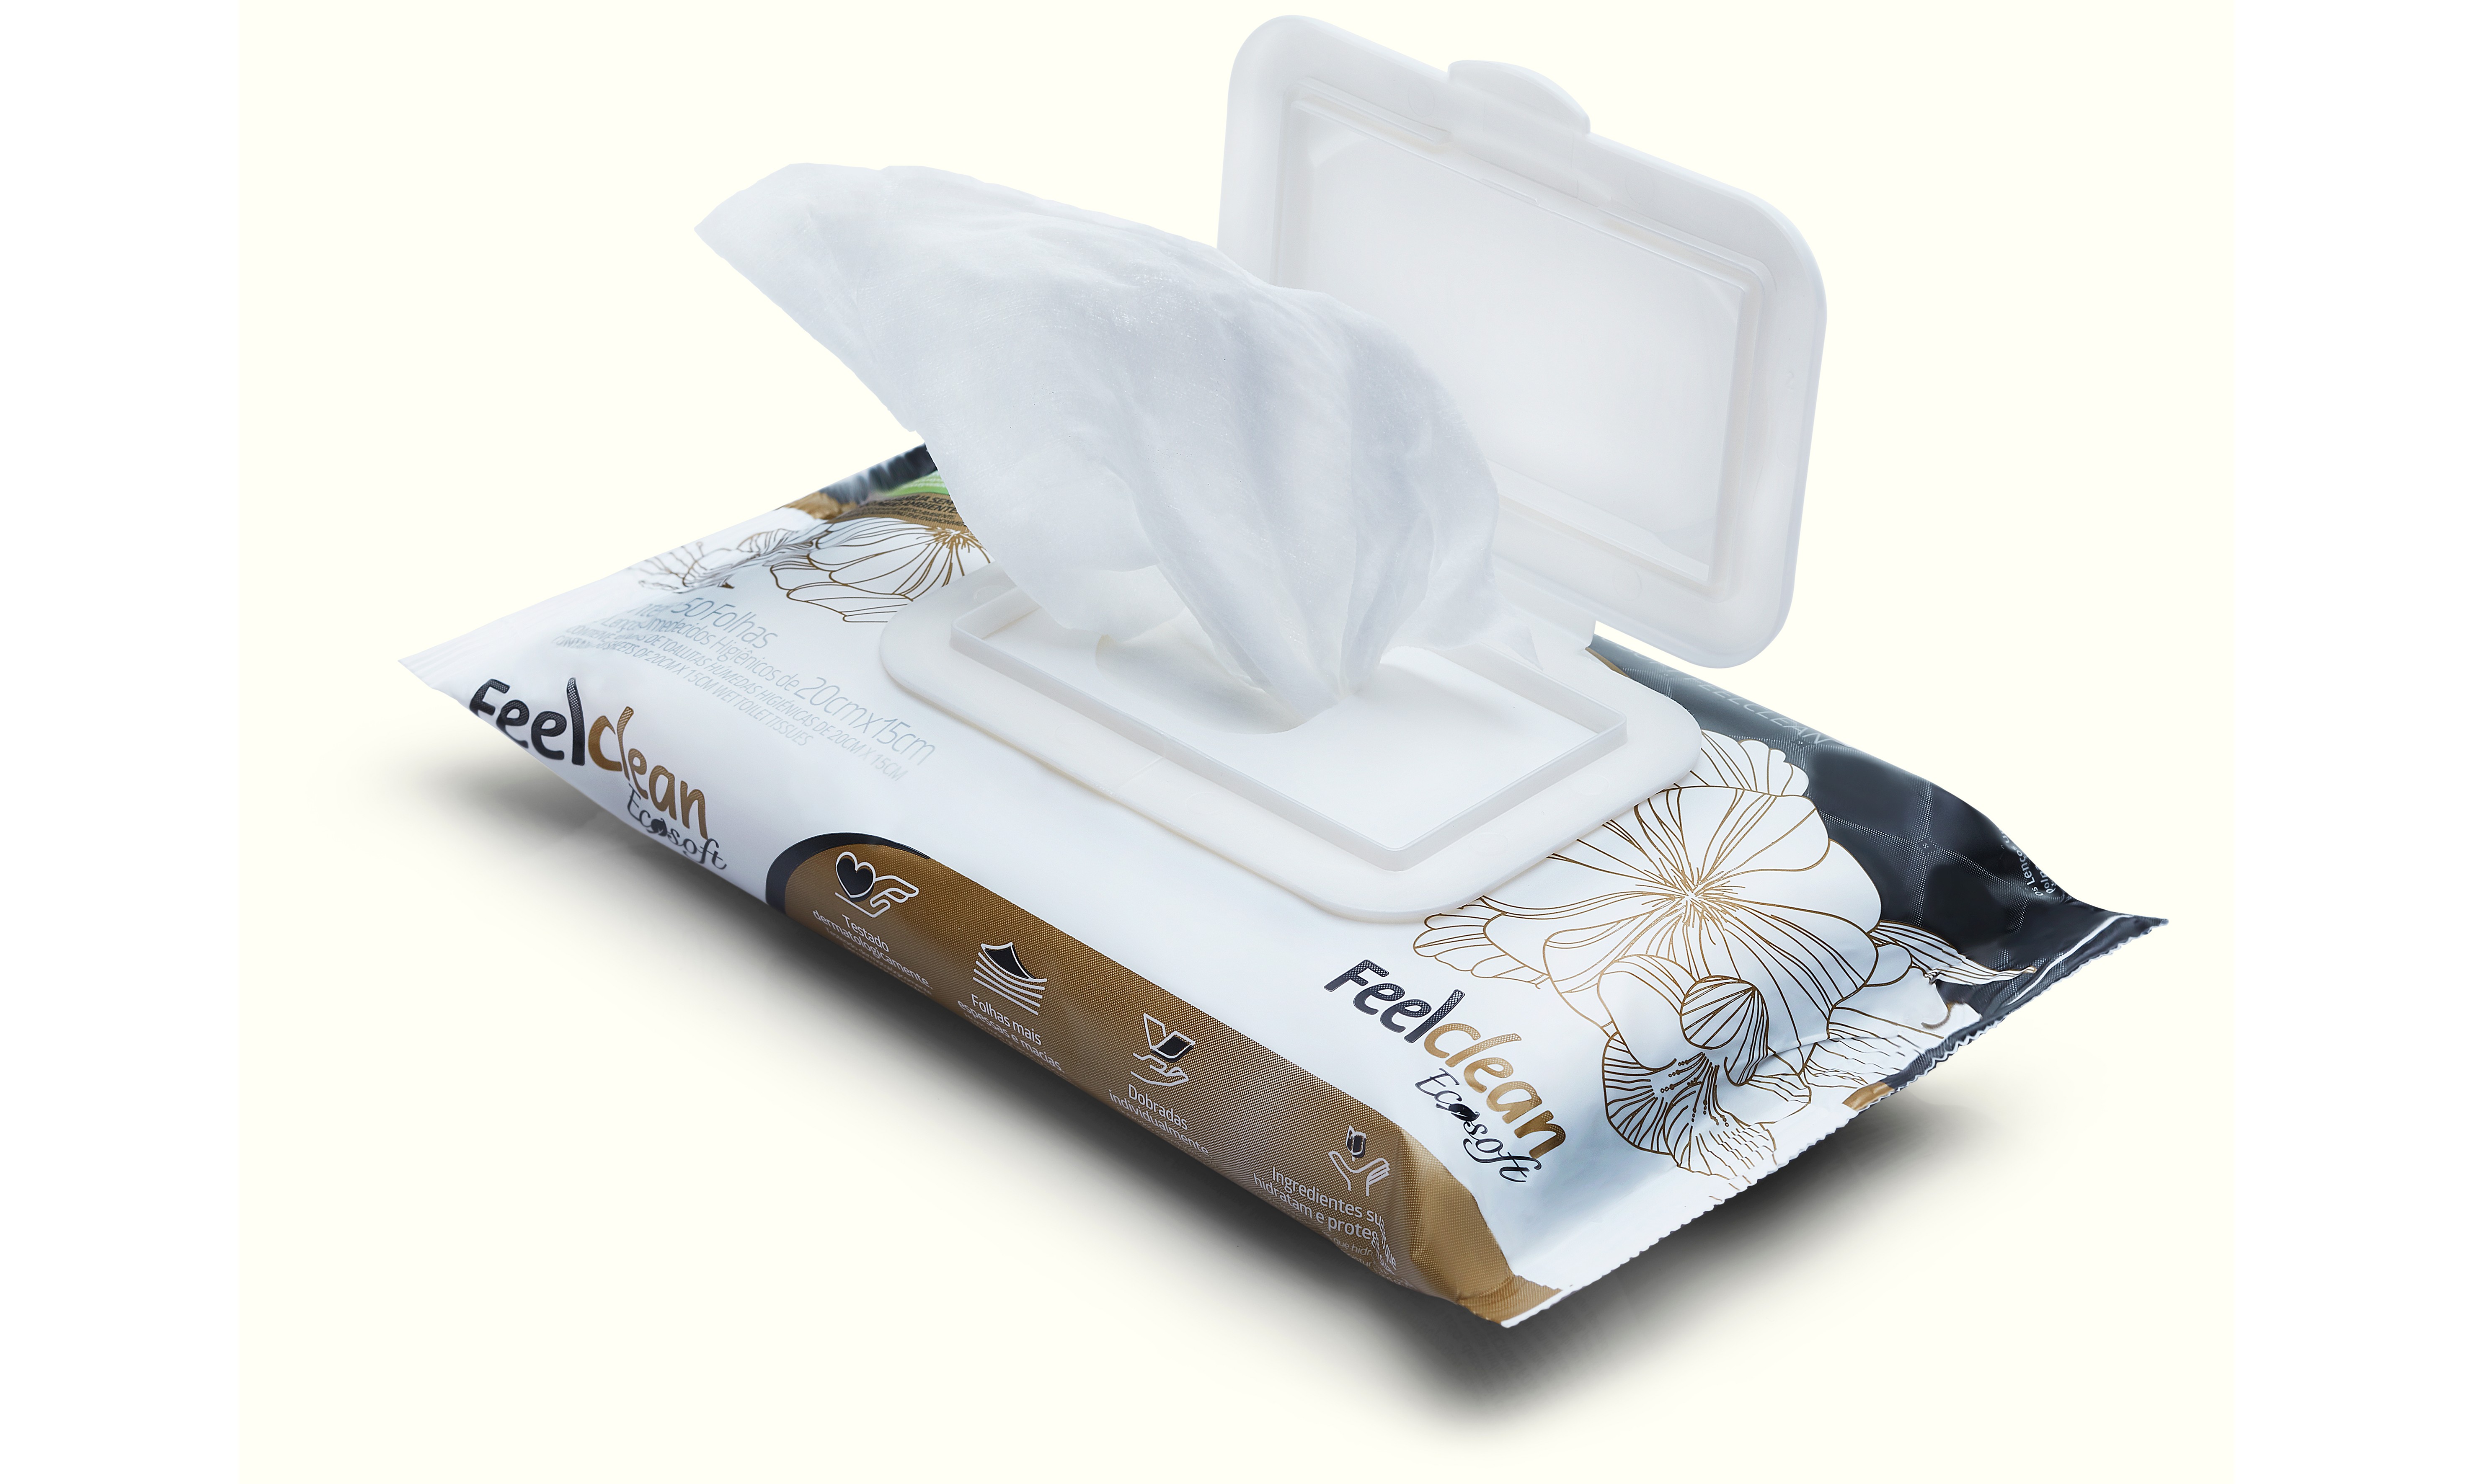 EcoSoft FeelClean Hygienic Wet Tissues with Flip Top Lid